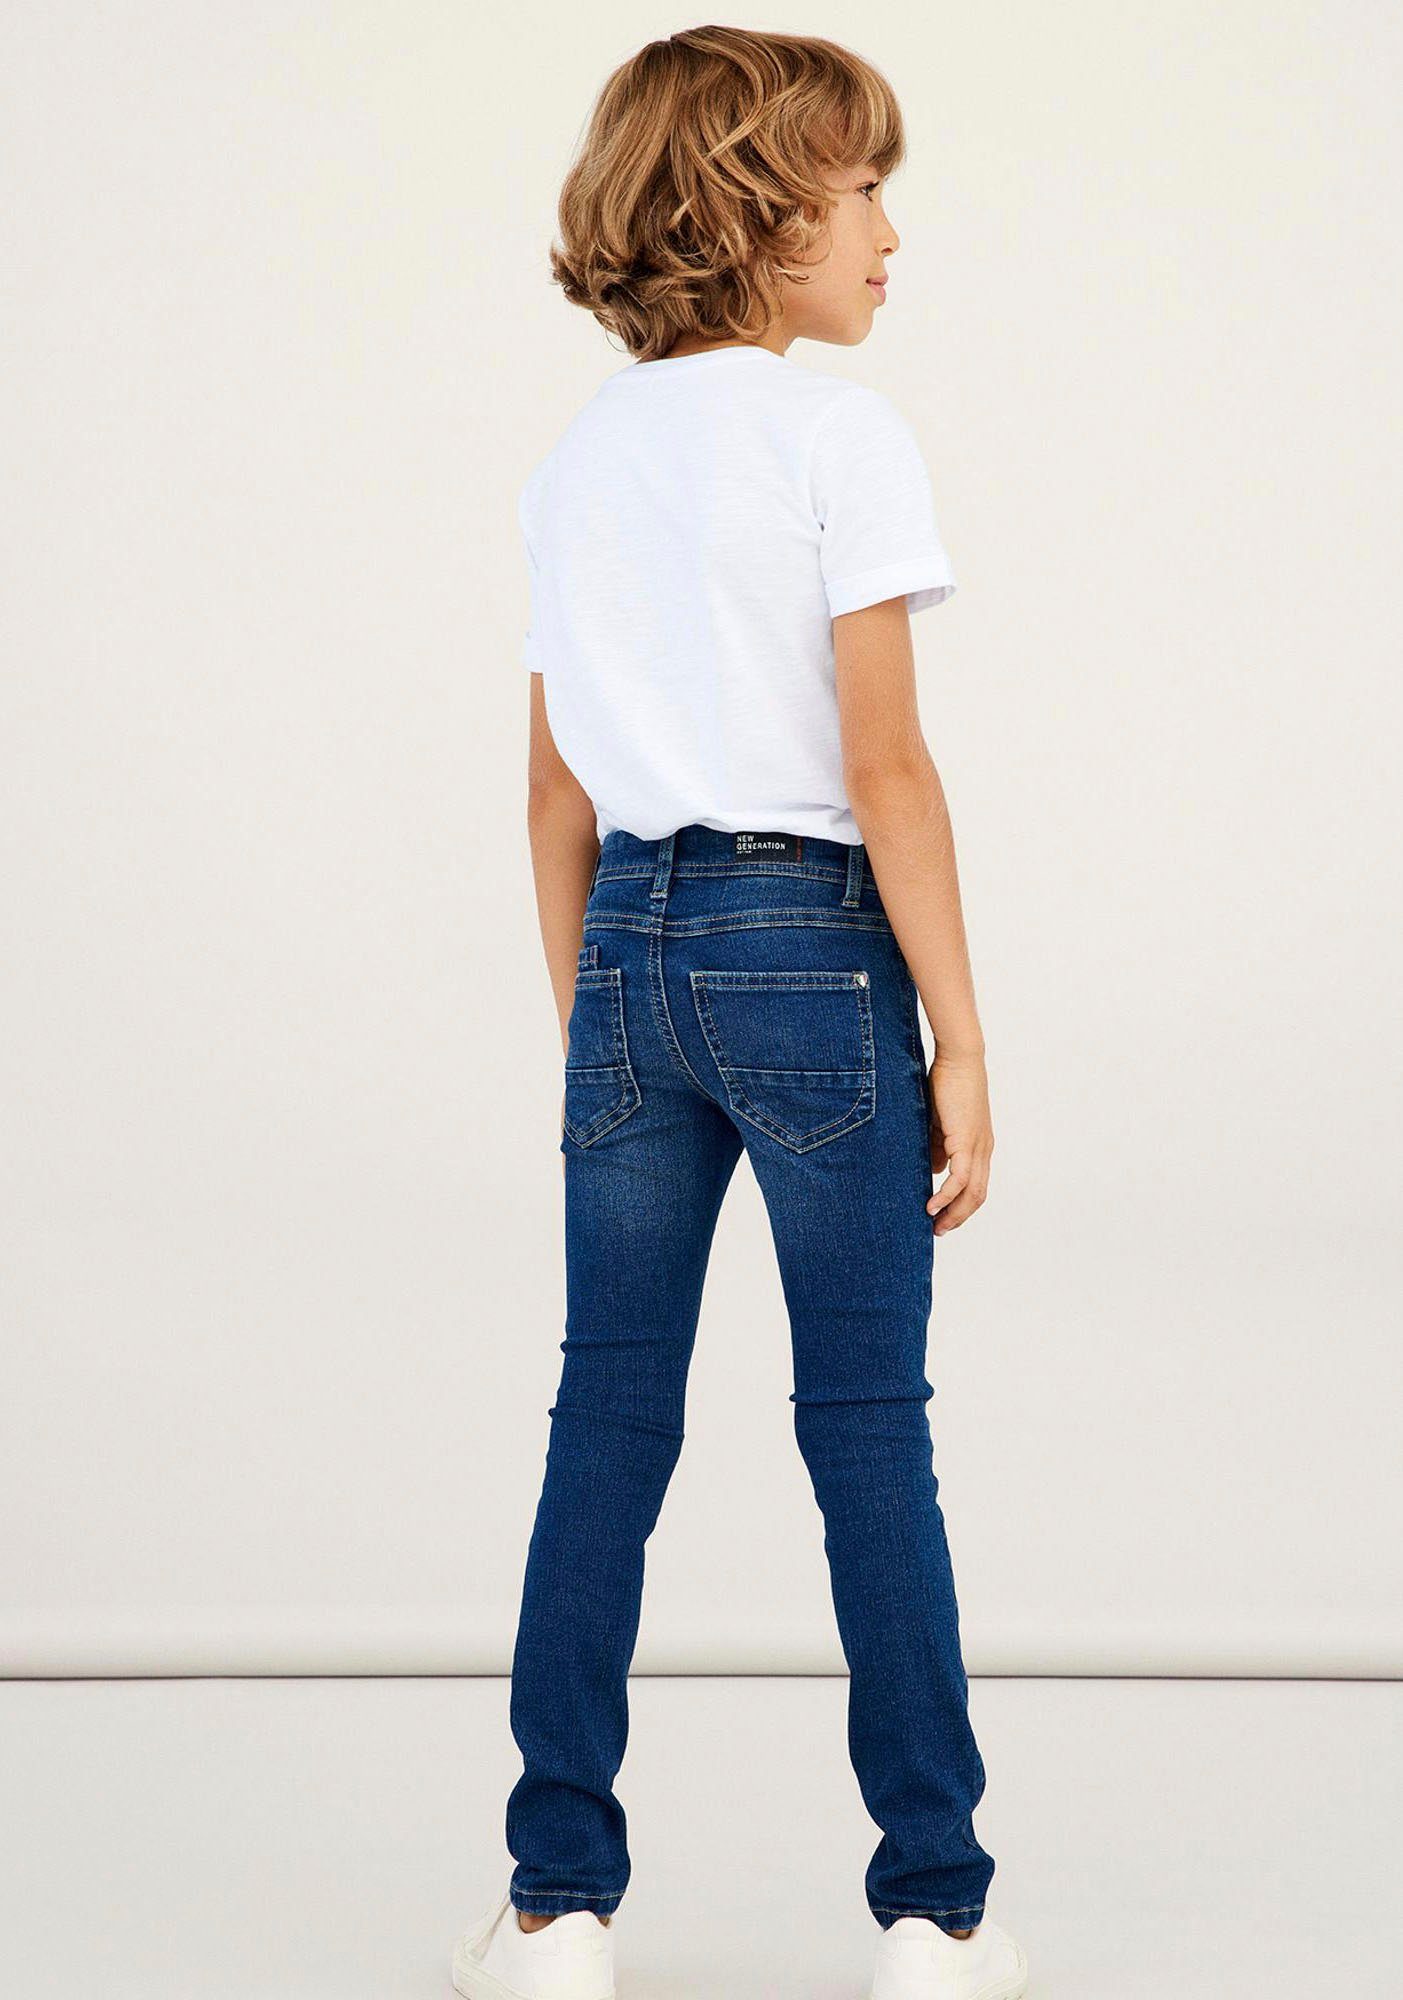 DNMTAUL 3618 Stretch | jeans de OTTO in shop NKMTHEO Name online It PANT